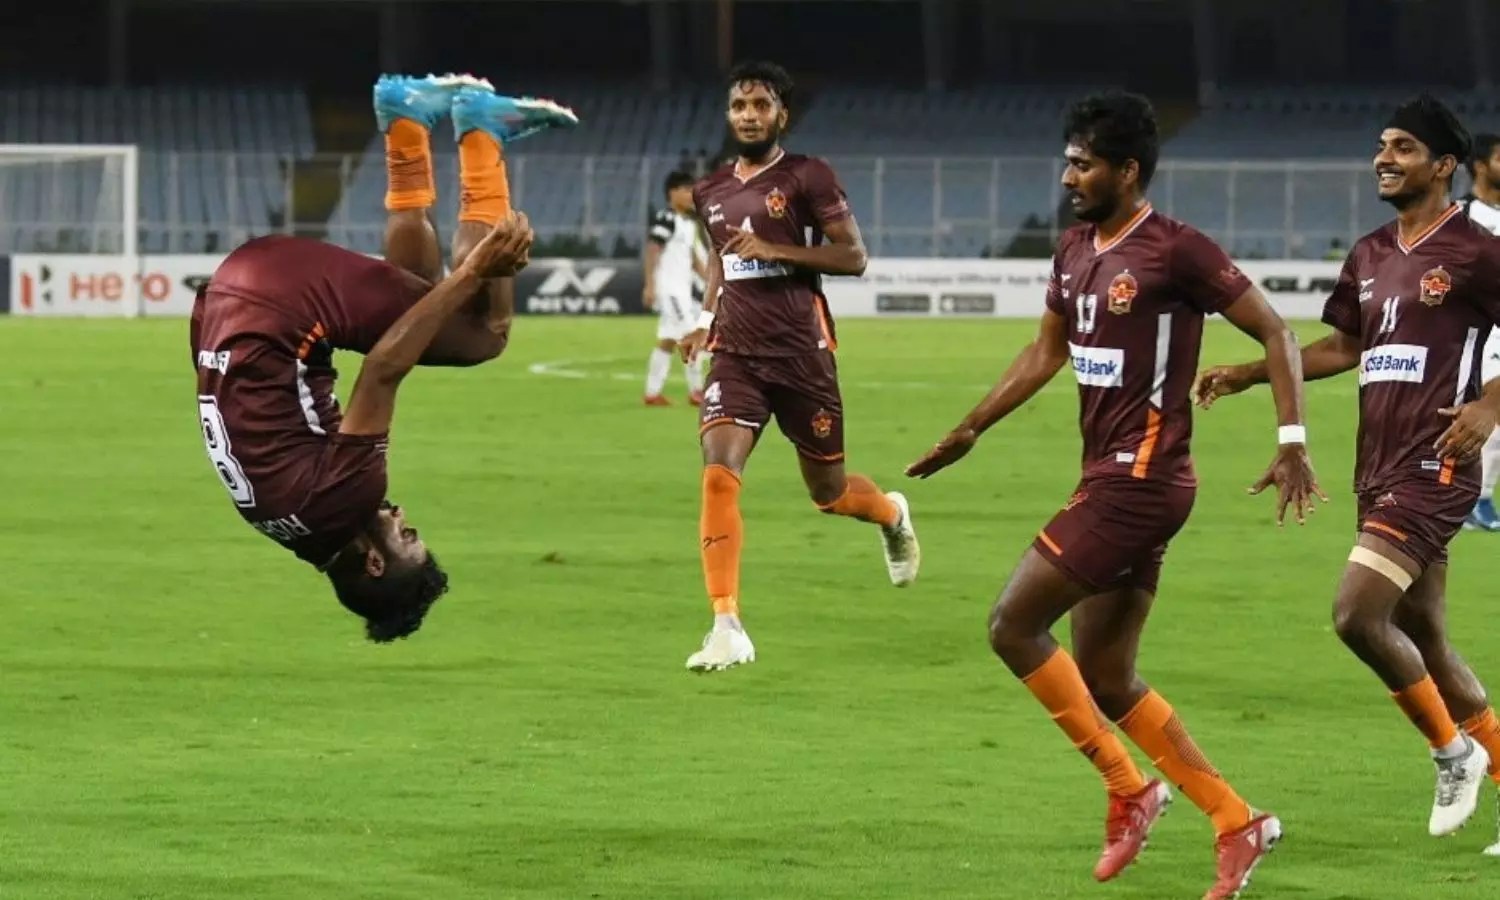 AFC Cup 2022: Gokulam Kerala ready for AFC Cup challenge as they take on ATK Mohun Bagan, Follow Gokulam Kerala FC vs ATK Mohun Bagan LIVE: Check GKFC vs ATKMB Team News, Live Streaming